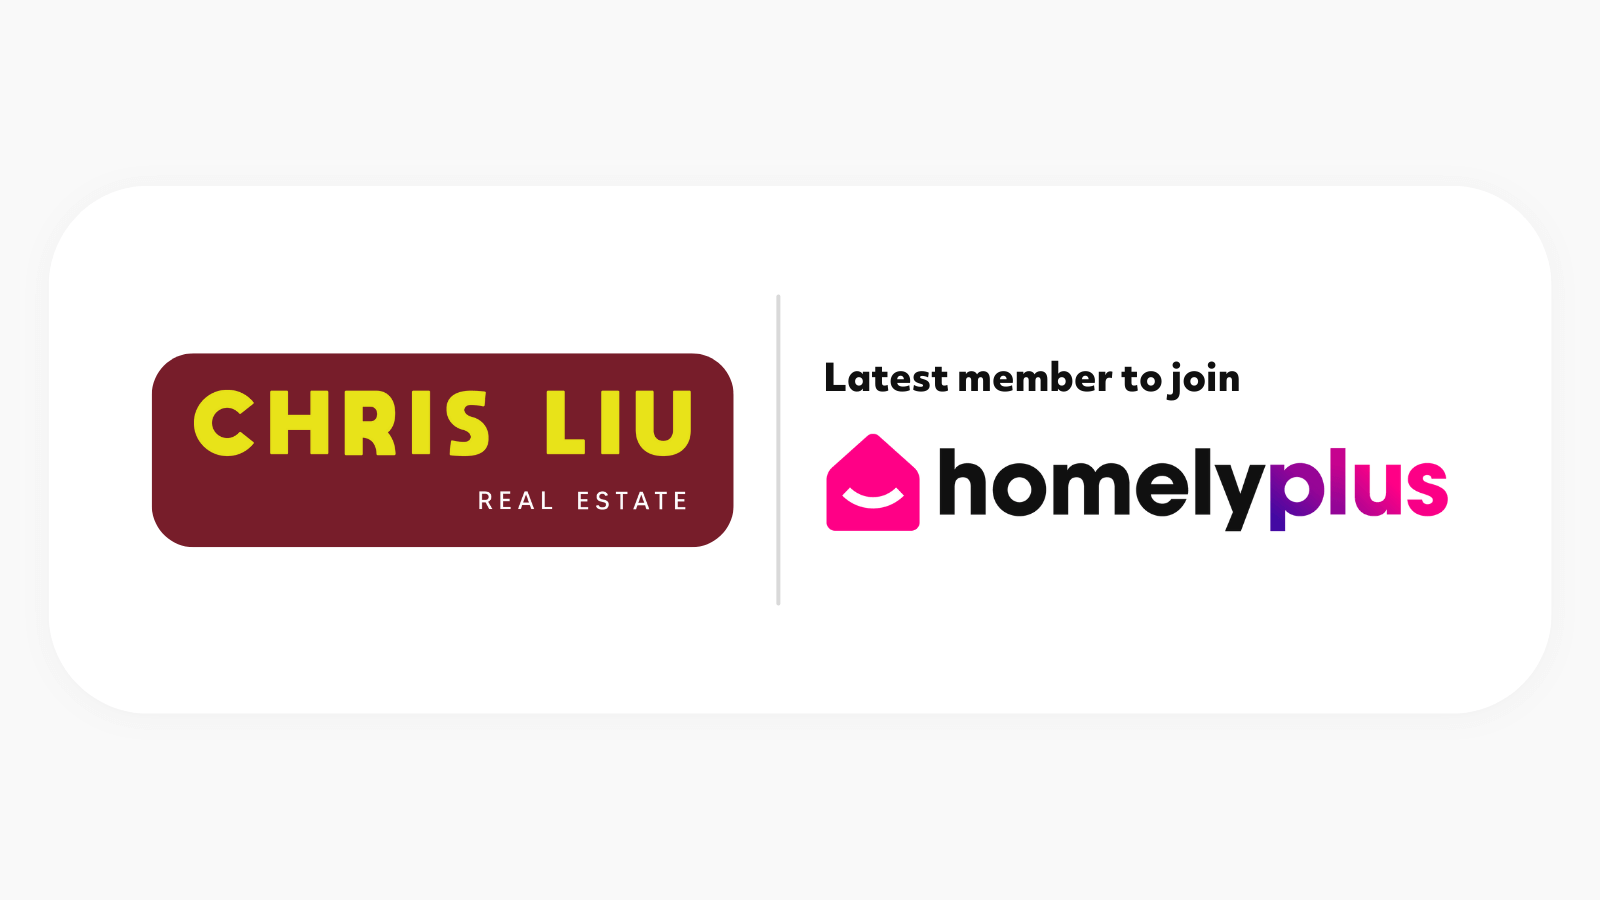 Chris Liu Real Estate joins Homely Plus